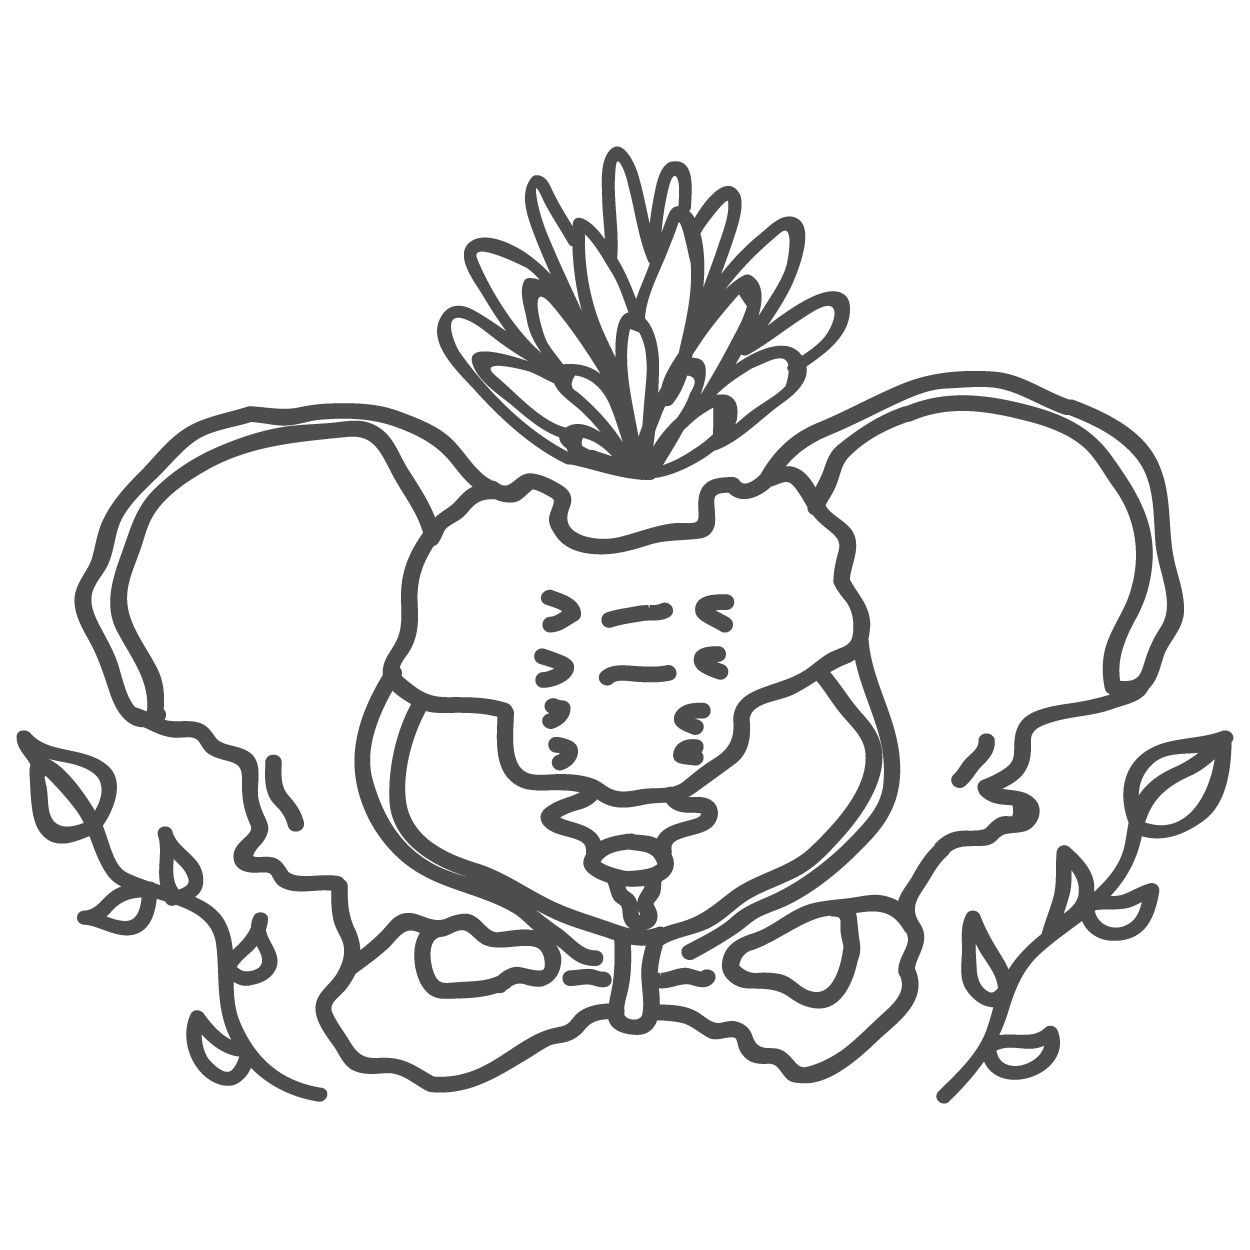 richmond doula project logo: illustration of hip bones and flower